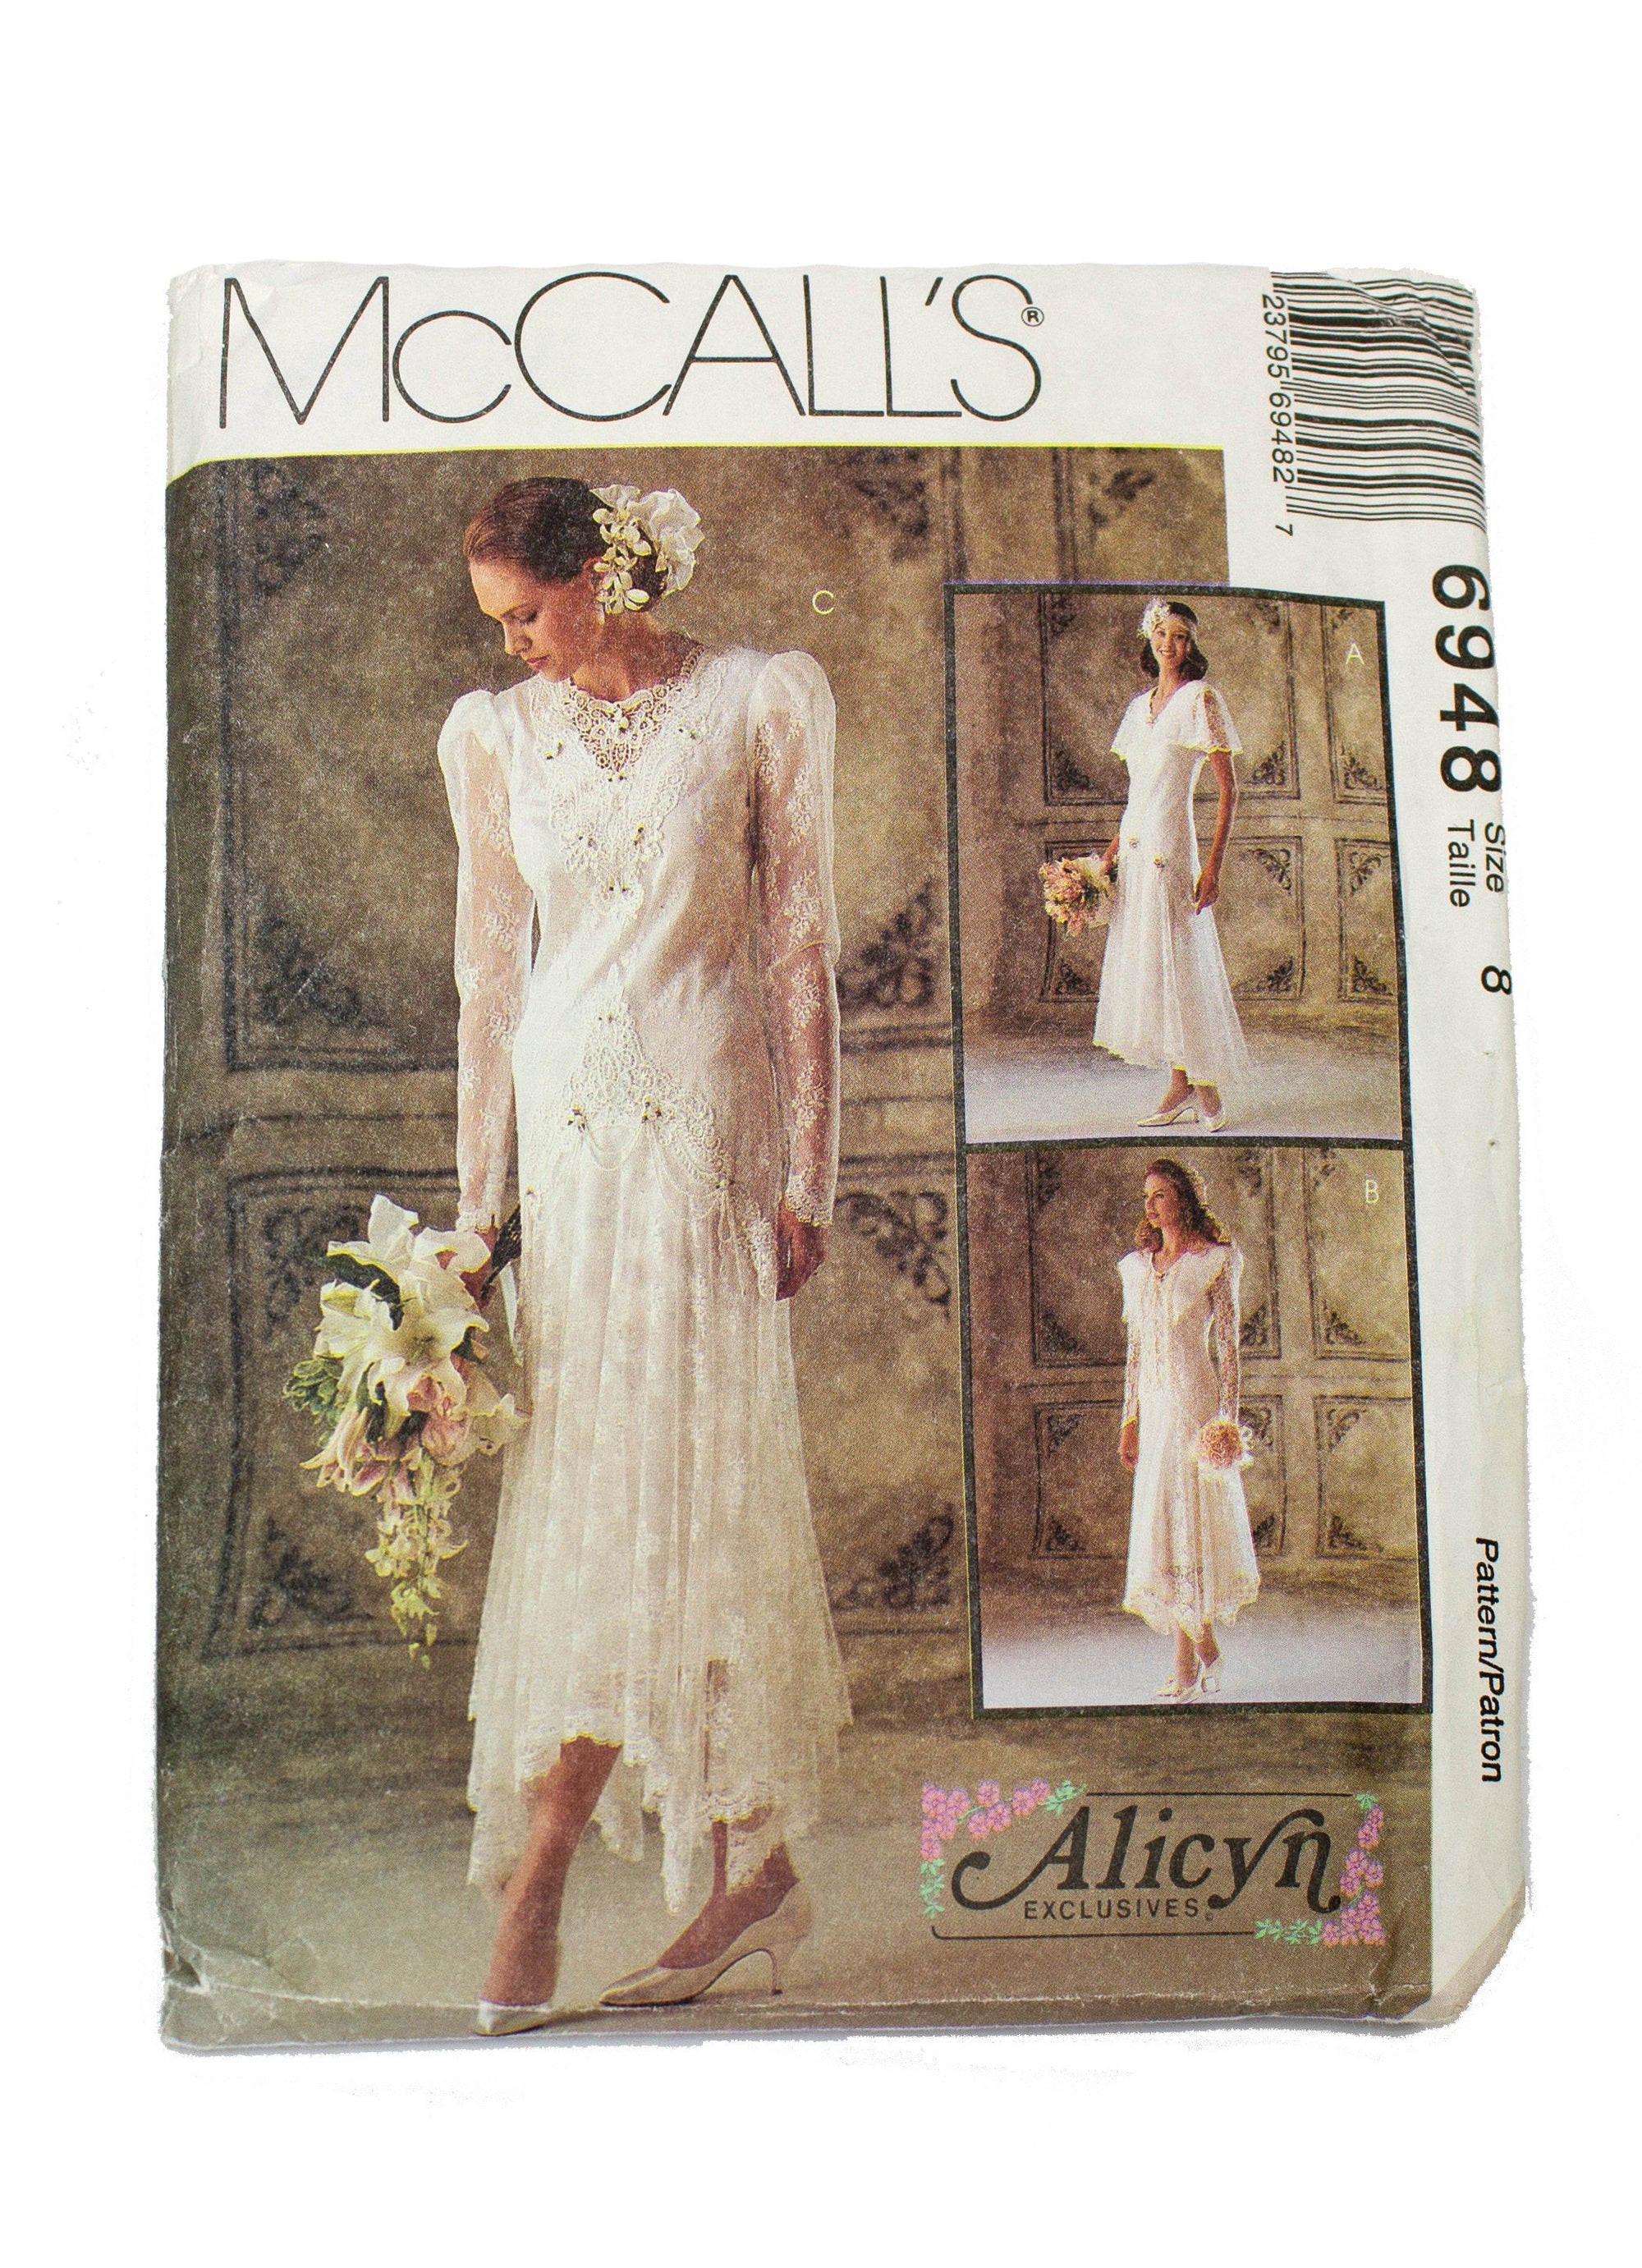 McCall's 6948 Women's Alicyn Exclusives Bridal Gown and Bridesmaid Dresses Uncut - Size 8